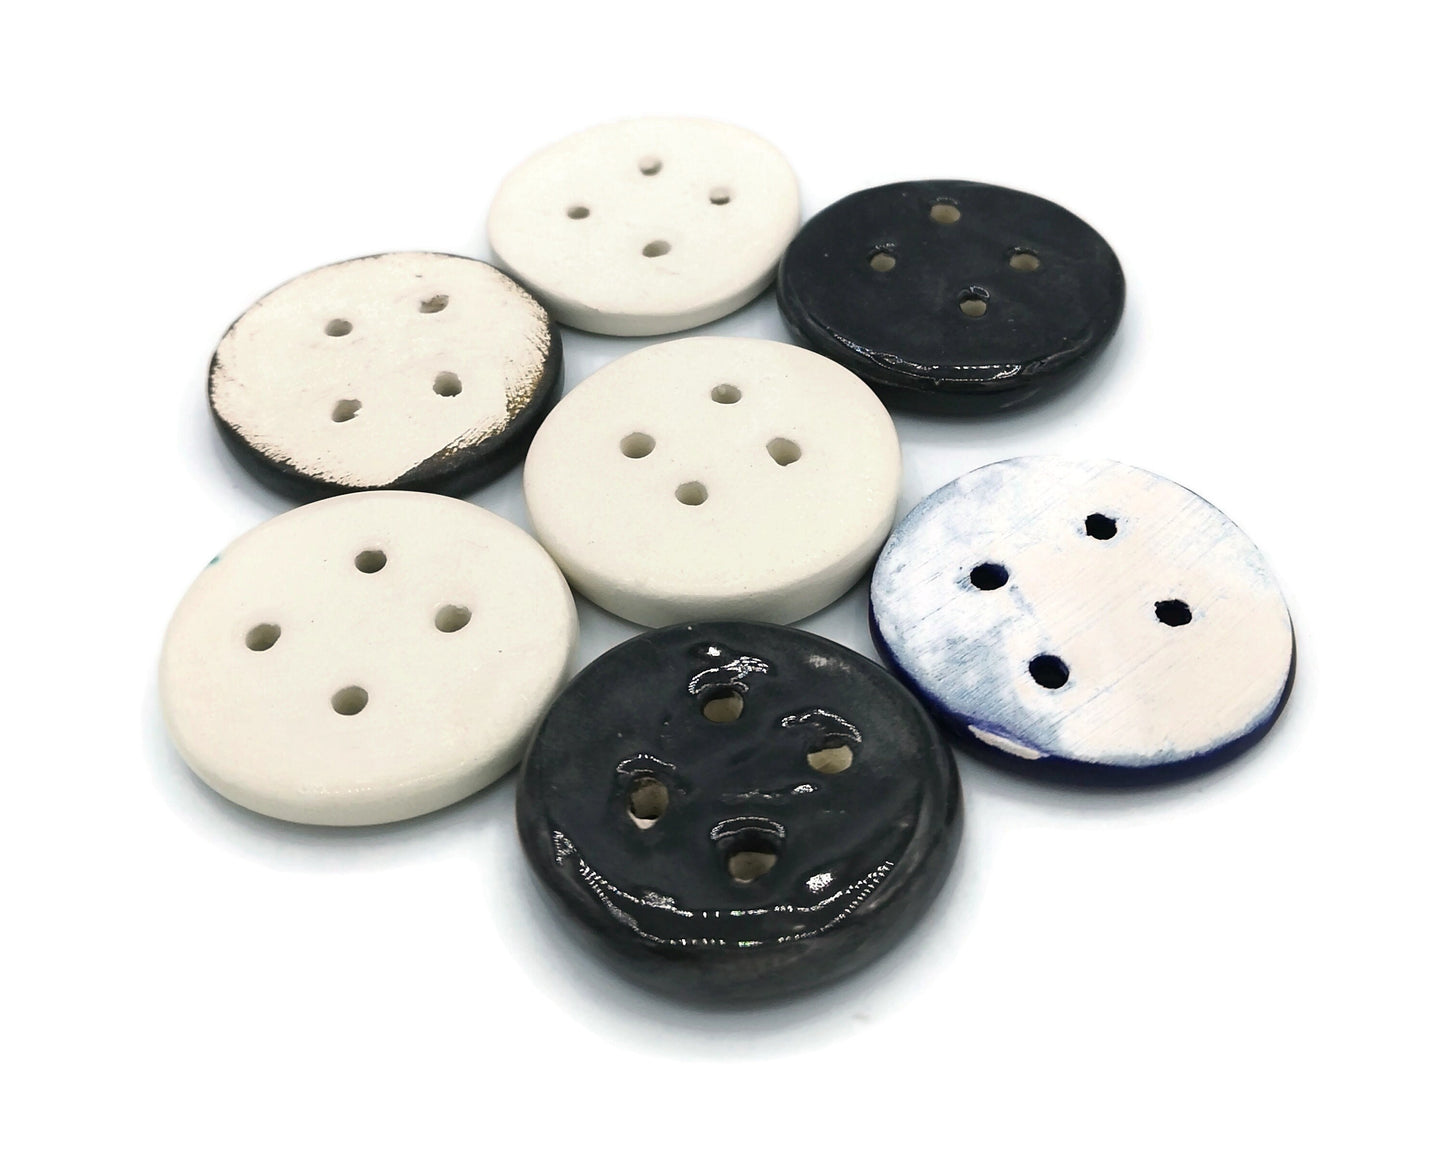 7Pc Black And White Sewing Buttons, Sewing Supplies And Notions, Strange And Unusual Elegant Button, Best Sellers Clay Buttons Round Novelty - Ceramica Ana Rafael